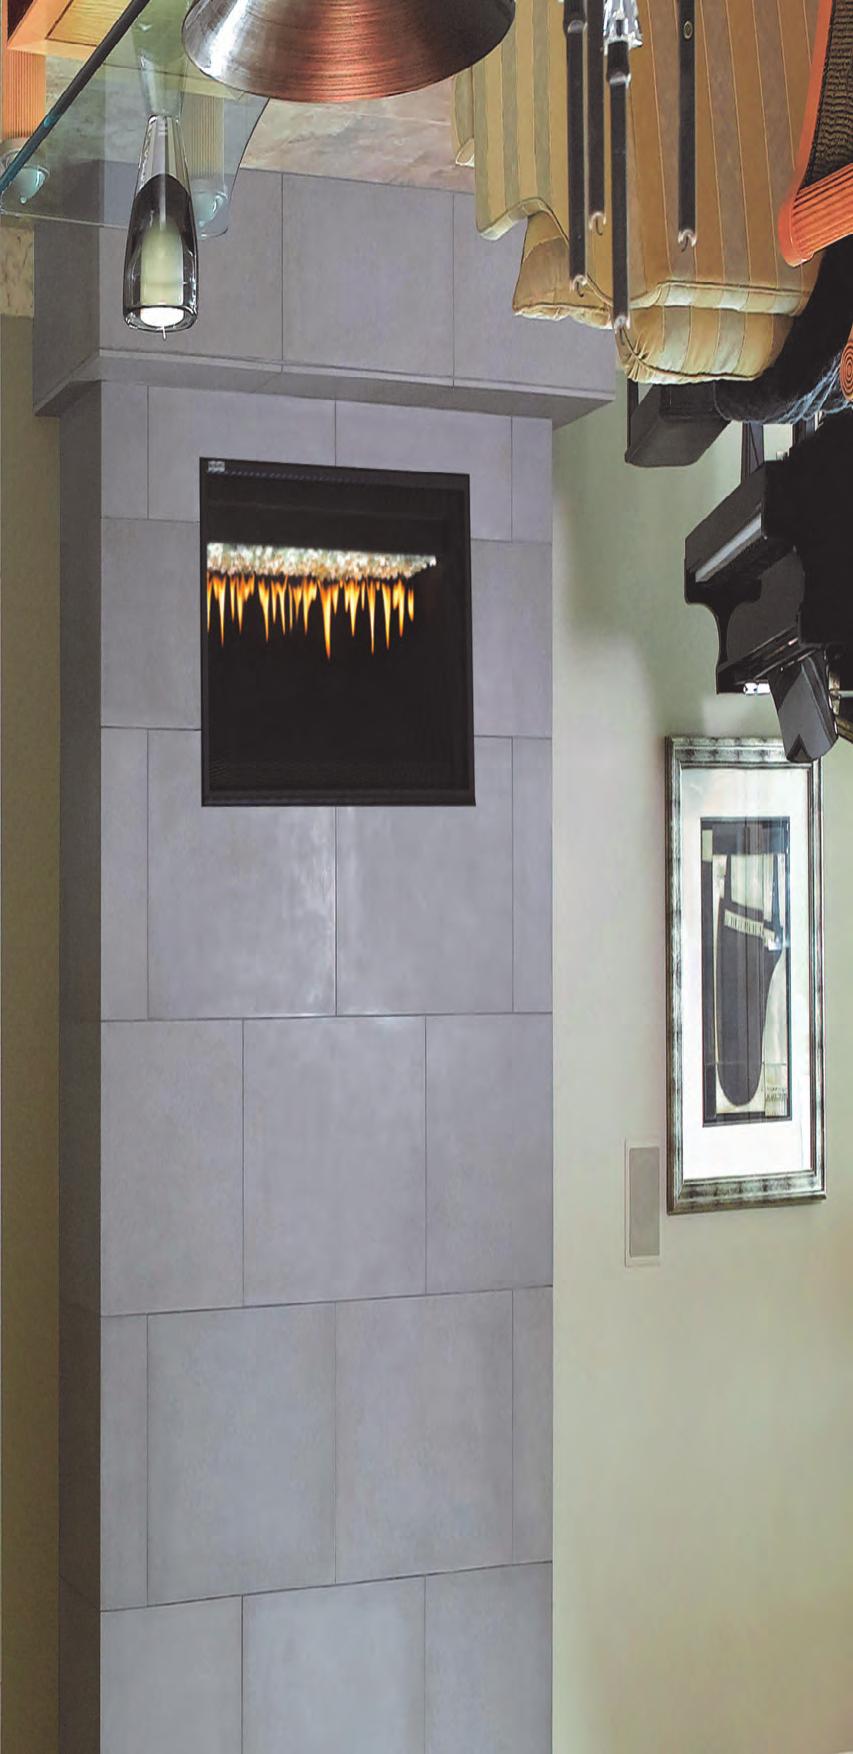 P & PL Series Gas Fireplaces The P & PL Series direct-vent gas fireplaces offer great design, innovative technology, and versatility all in one neat package.